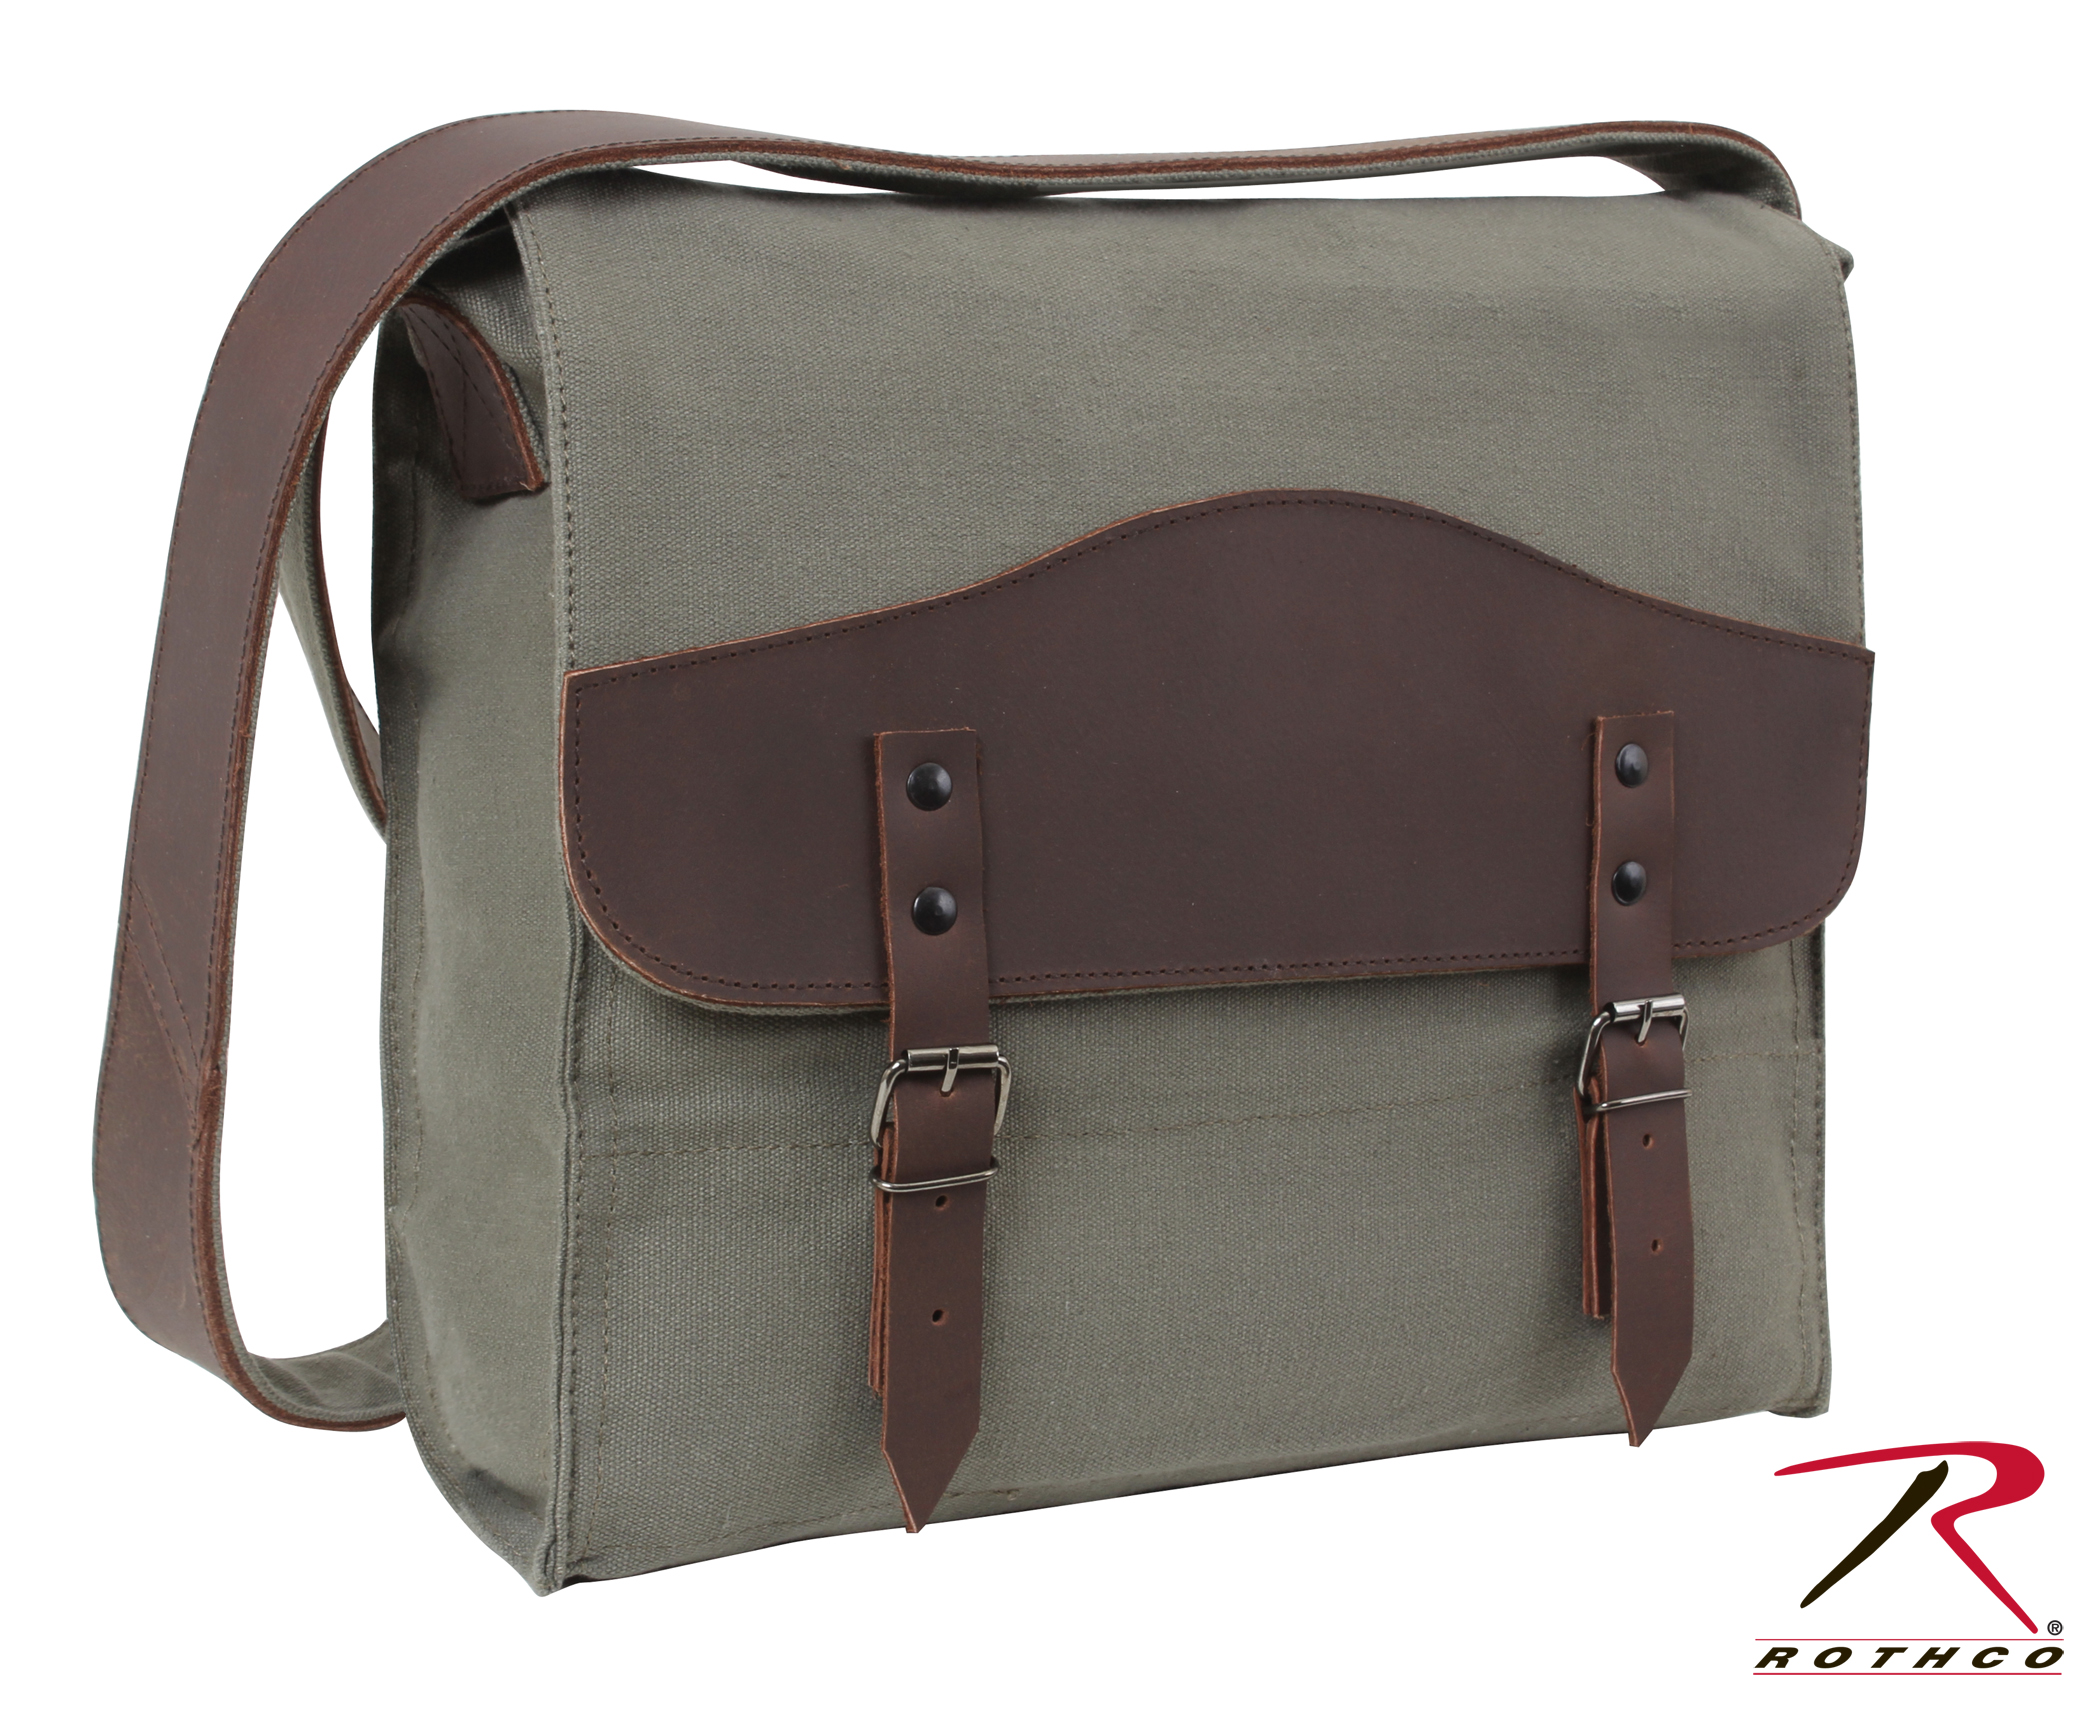 Rothco Vintage Canvas Medic Bag w/ Leather Accents